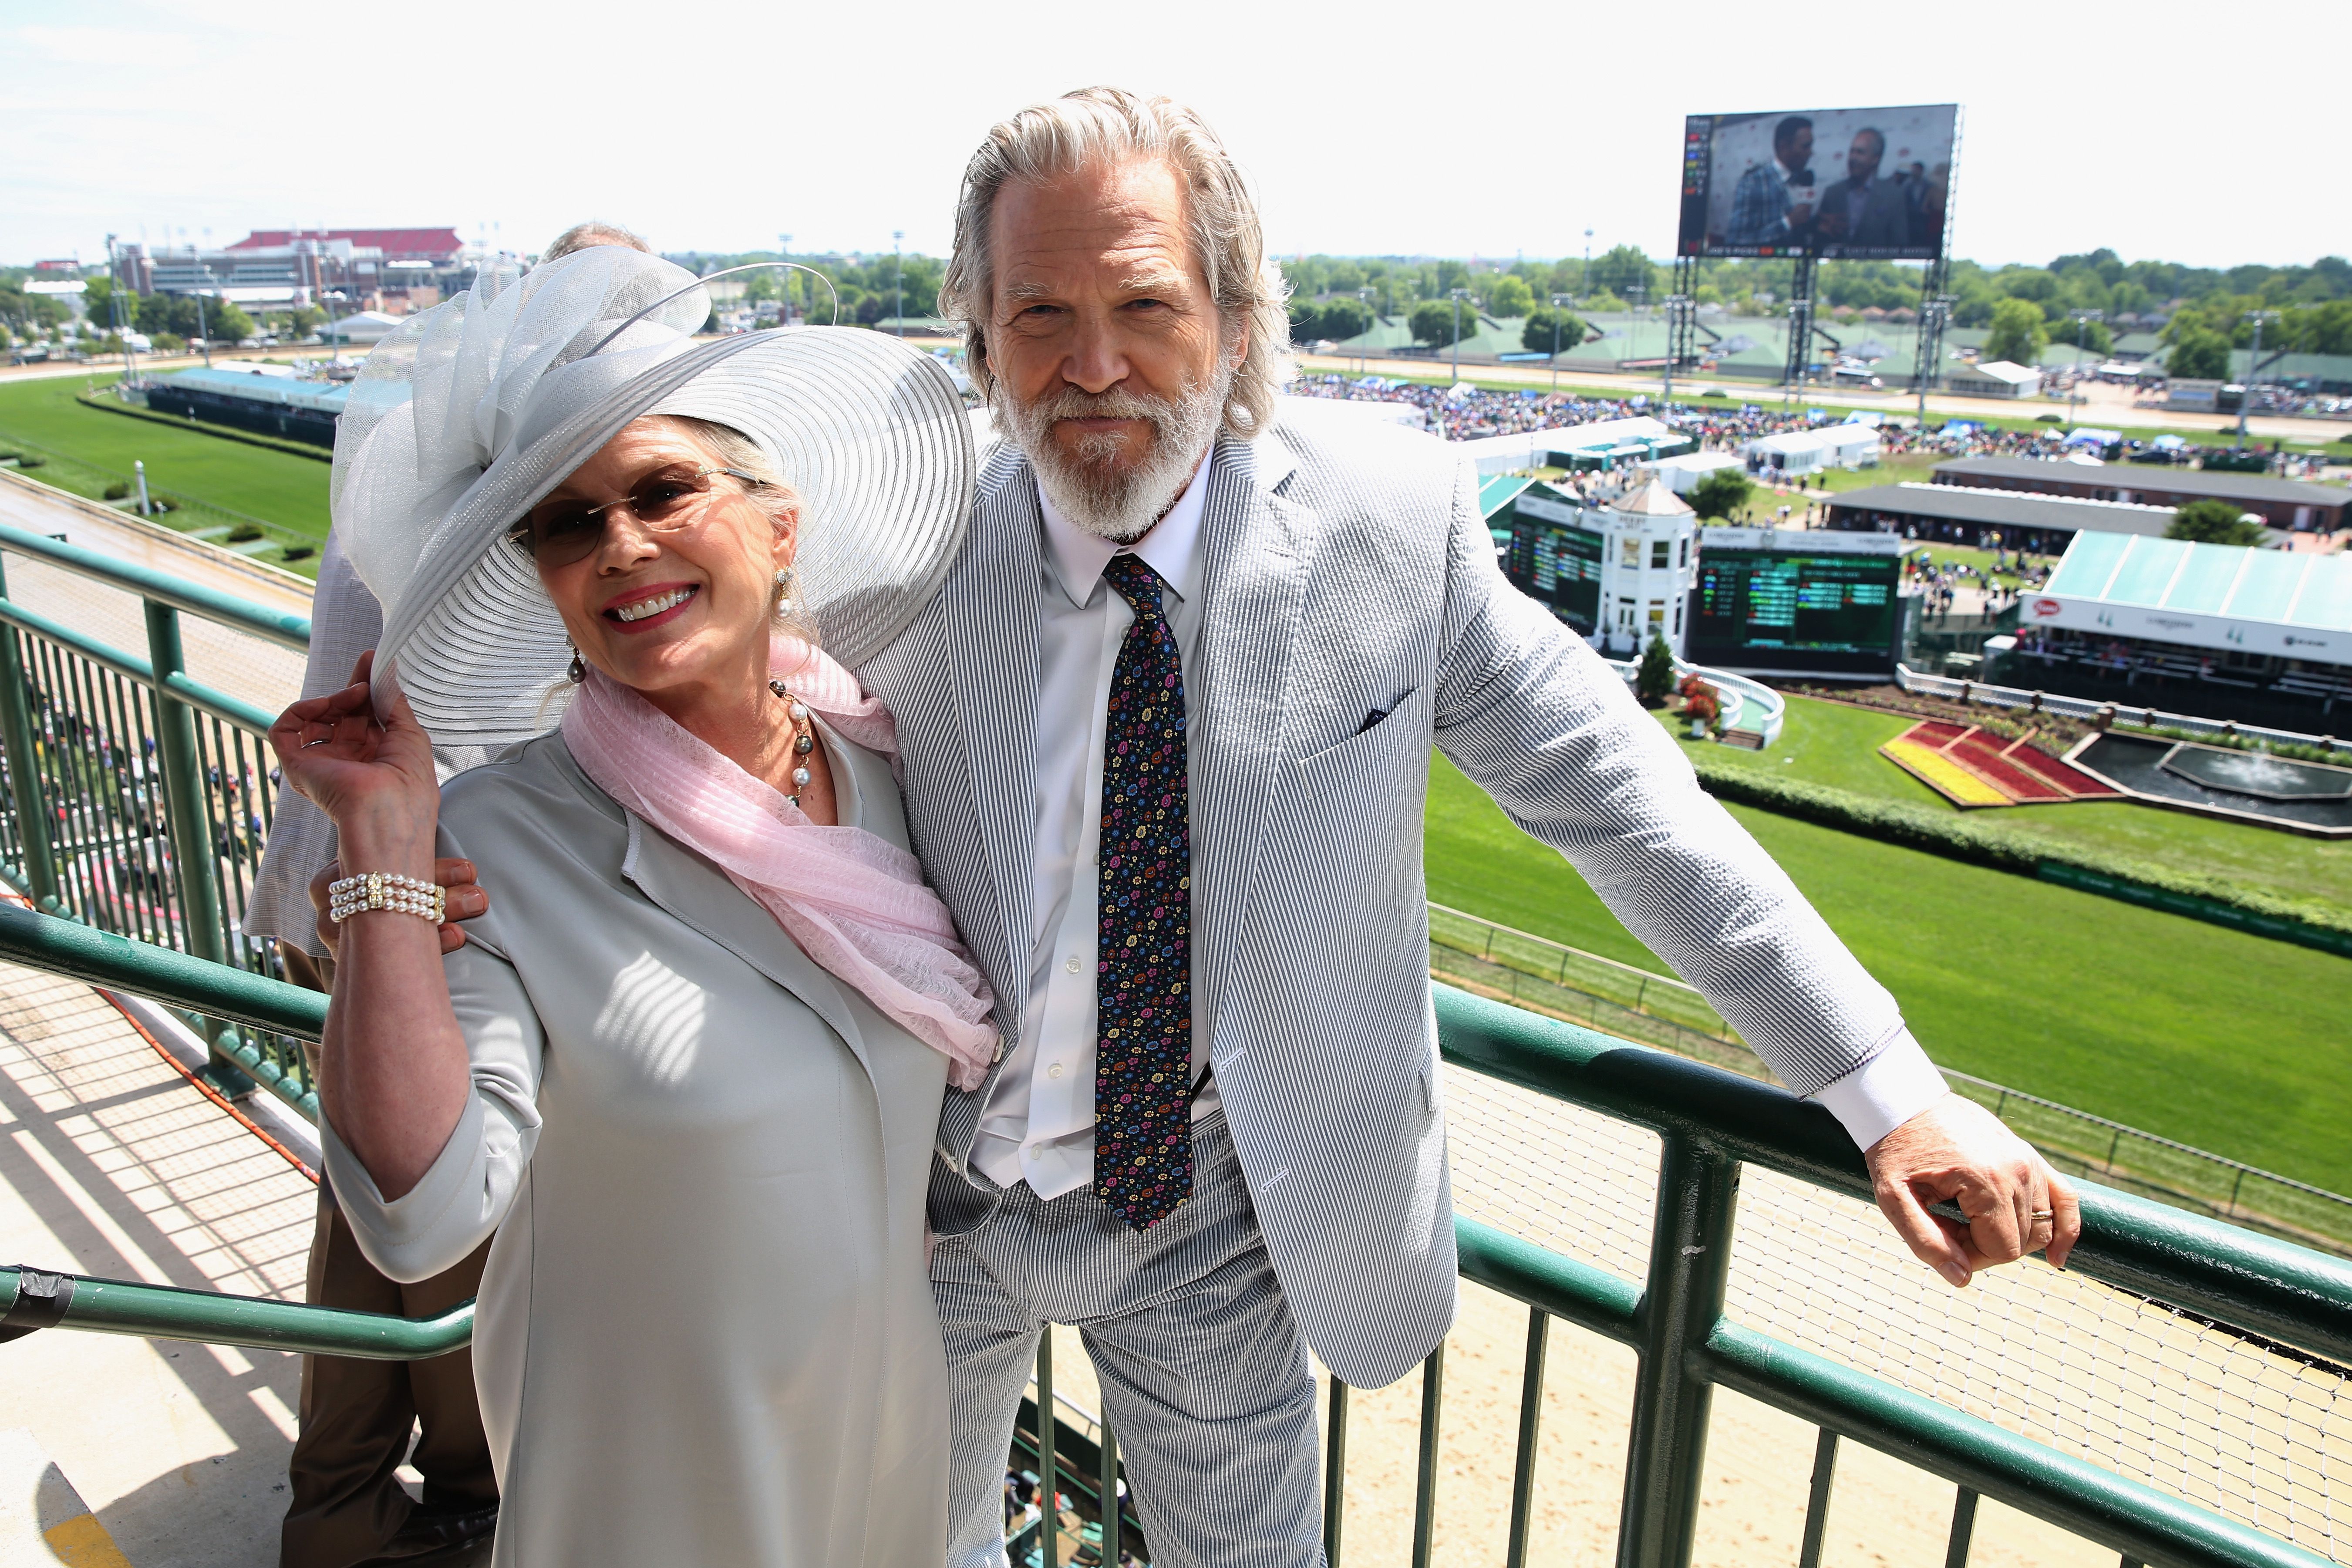 Susan Geston and Jeff Bridges, Star Of The Upcoming "Kingsman: The Golden Circle" at The Kentucky Derby at Churchill Downs on May 6, 2017 | Photo: Getty Images